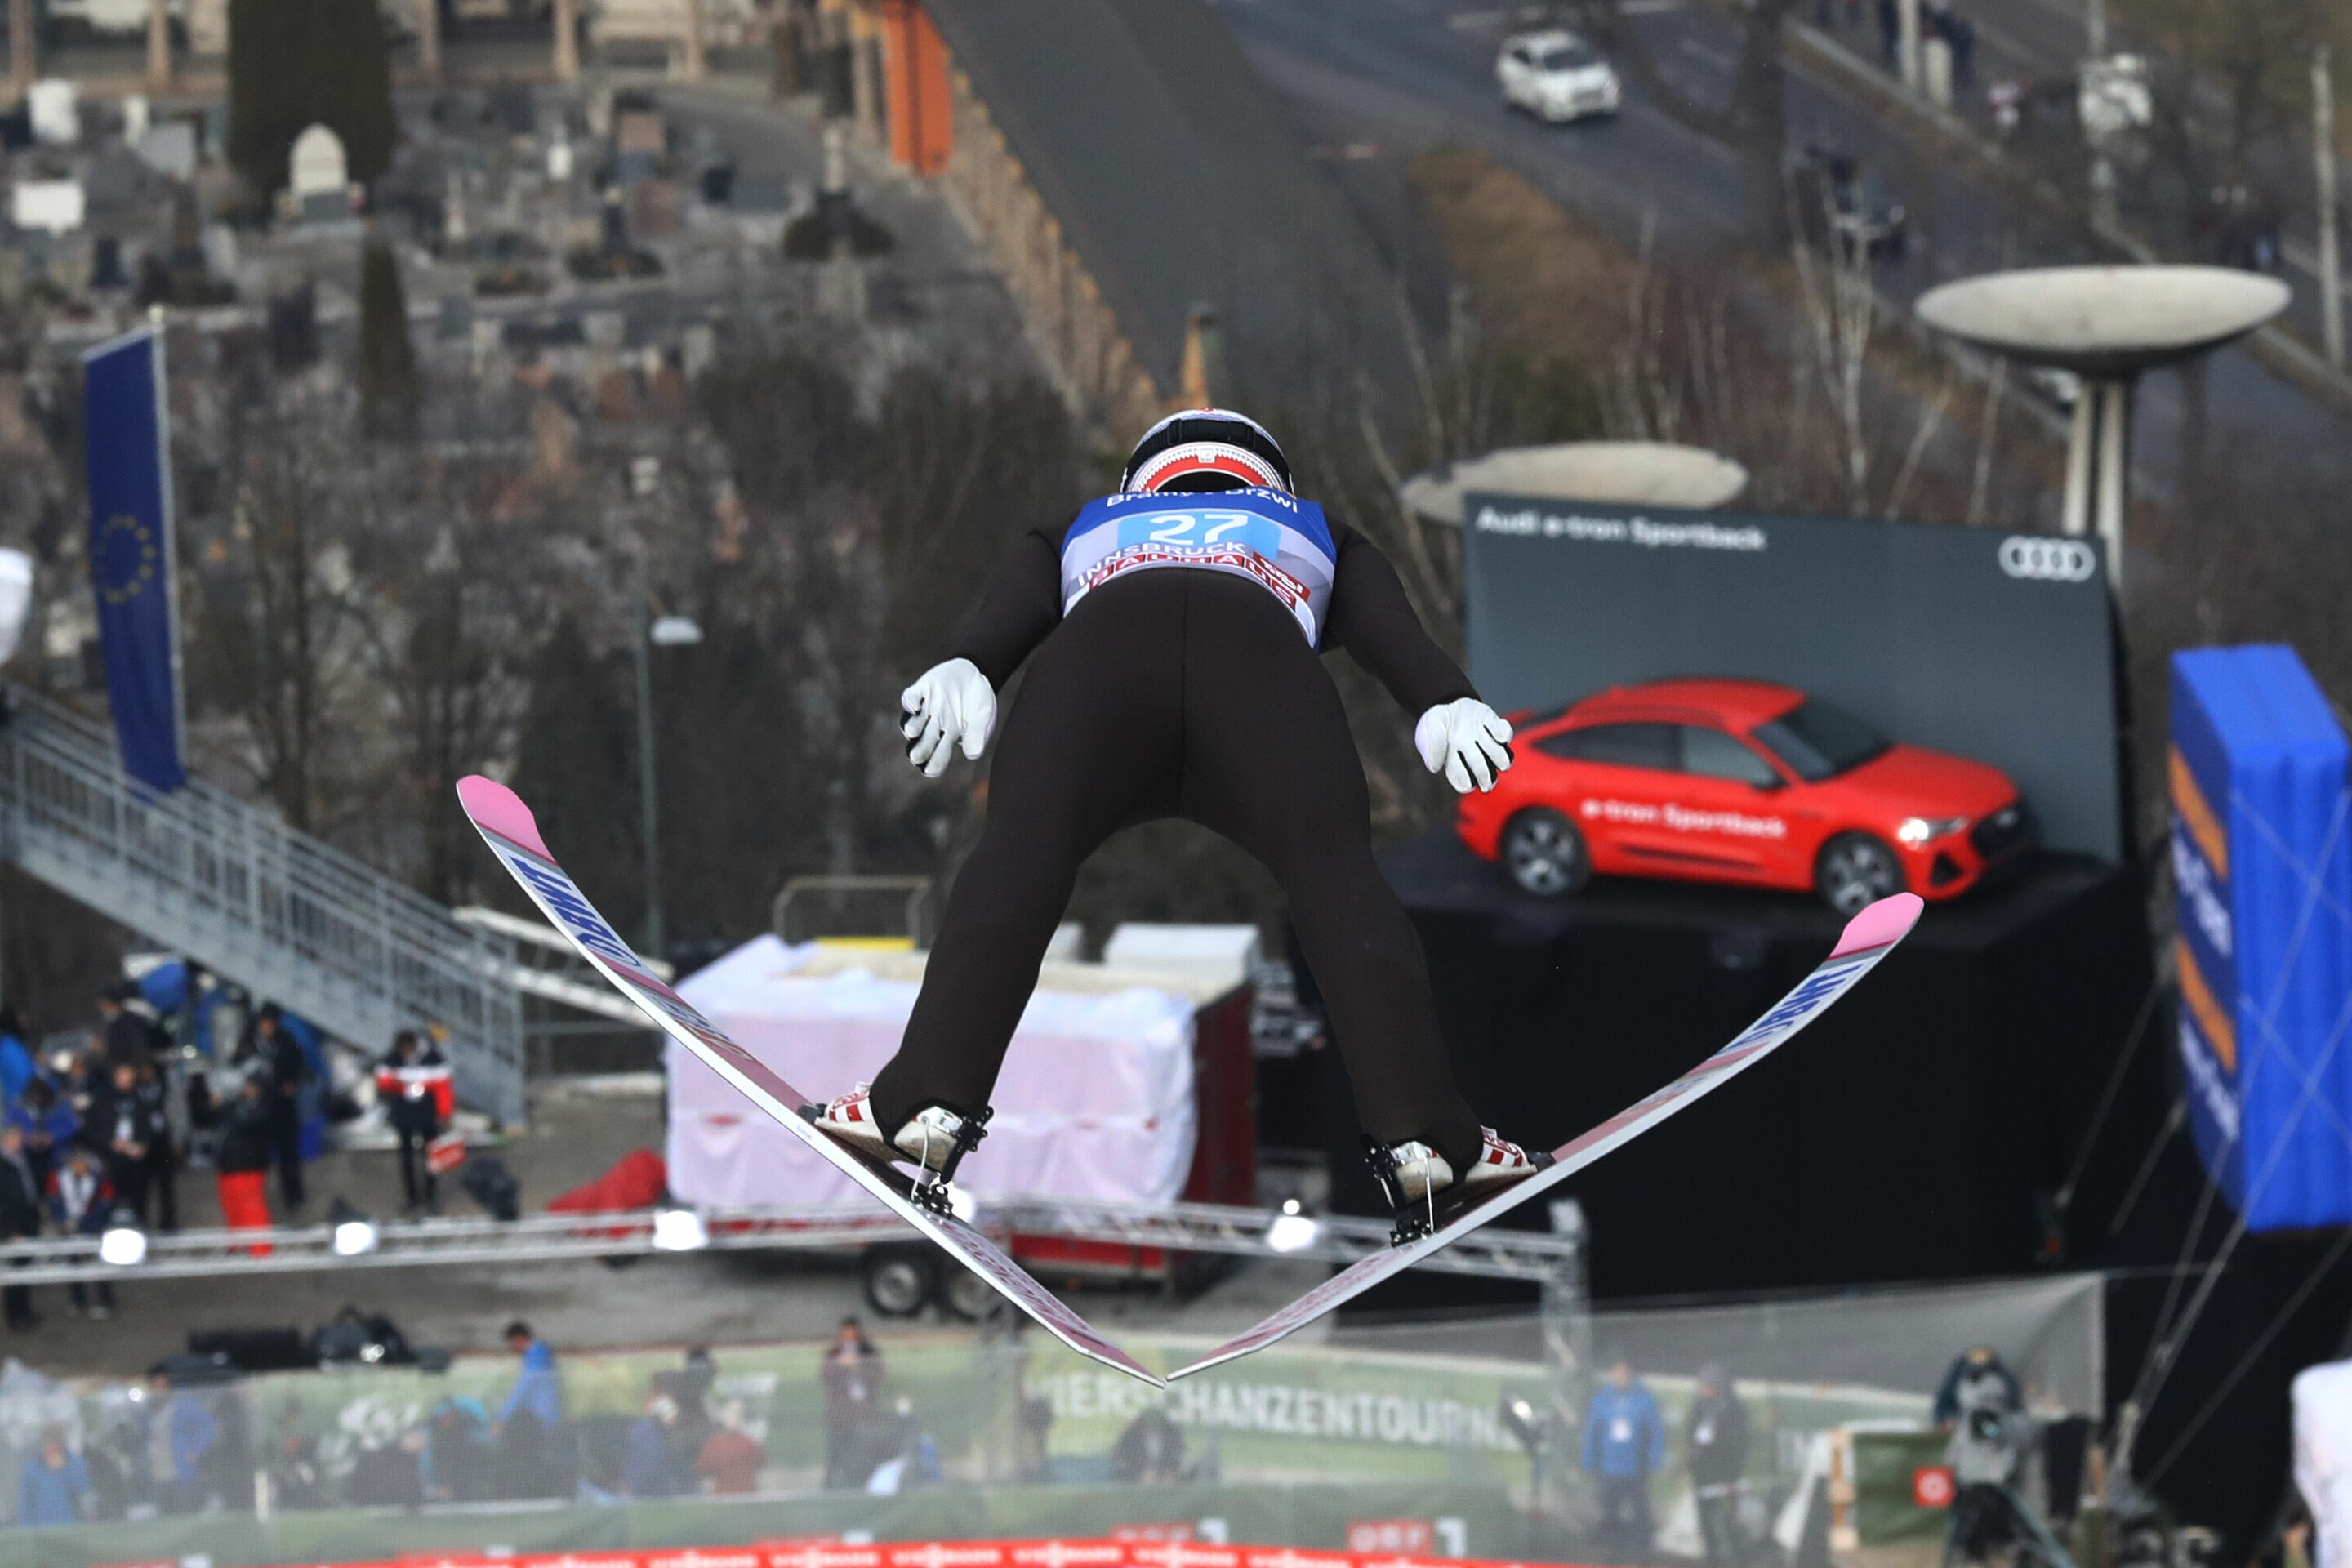 Audi at the 2019/2020 Four Hills Tournament